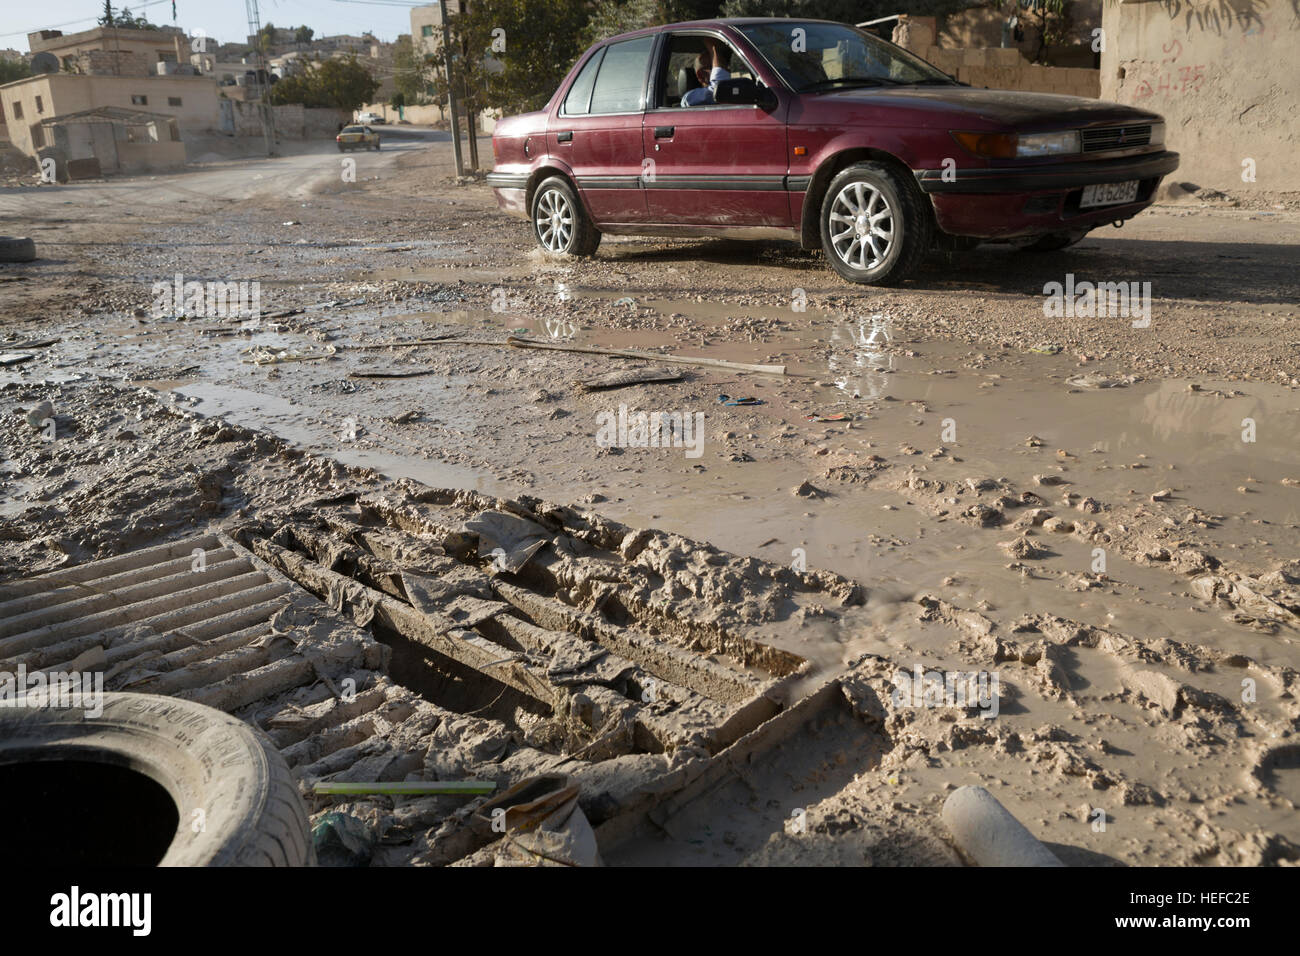 Sewage overflows in the streets of Zarqa, Jordan as a result of an overstressed wastewater treatment network. Stock Photo